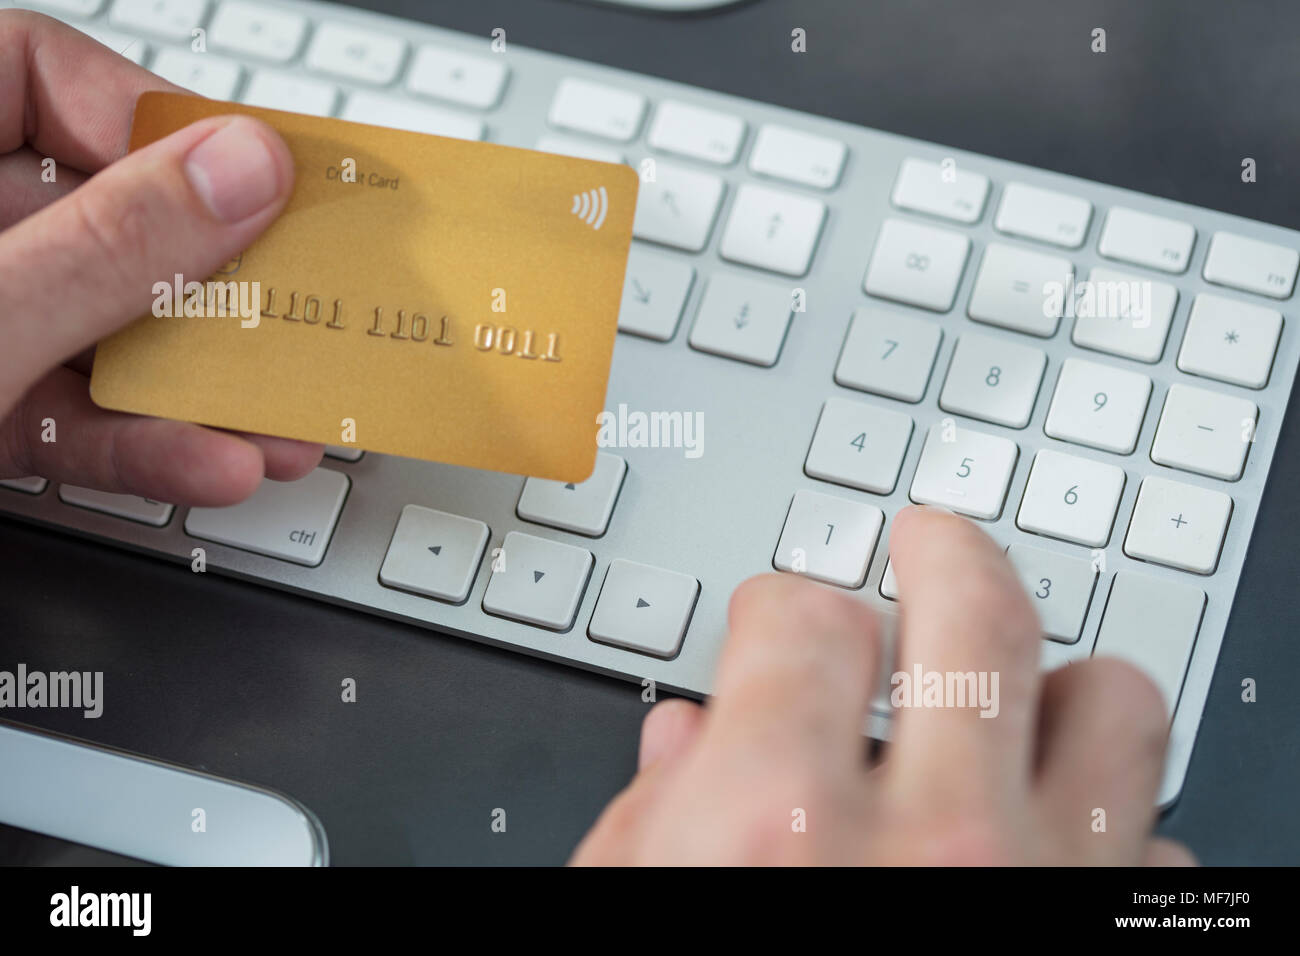 Man making online payment with credit card at desk, close-up Stock Photo